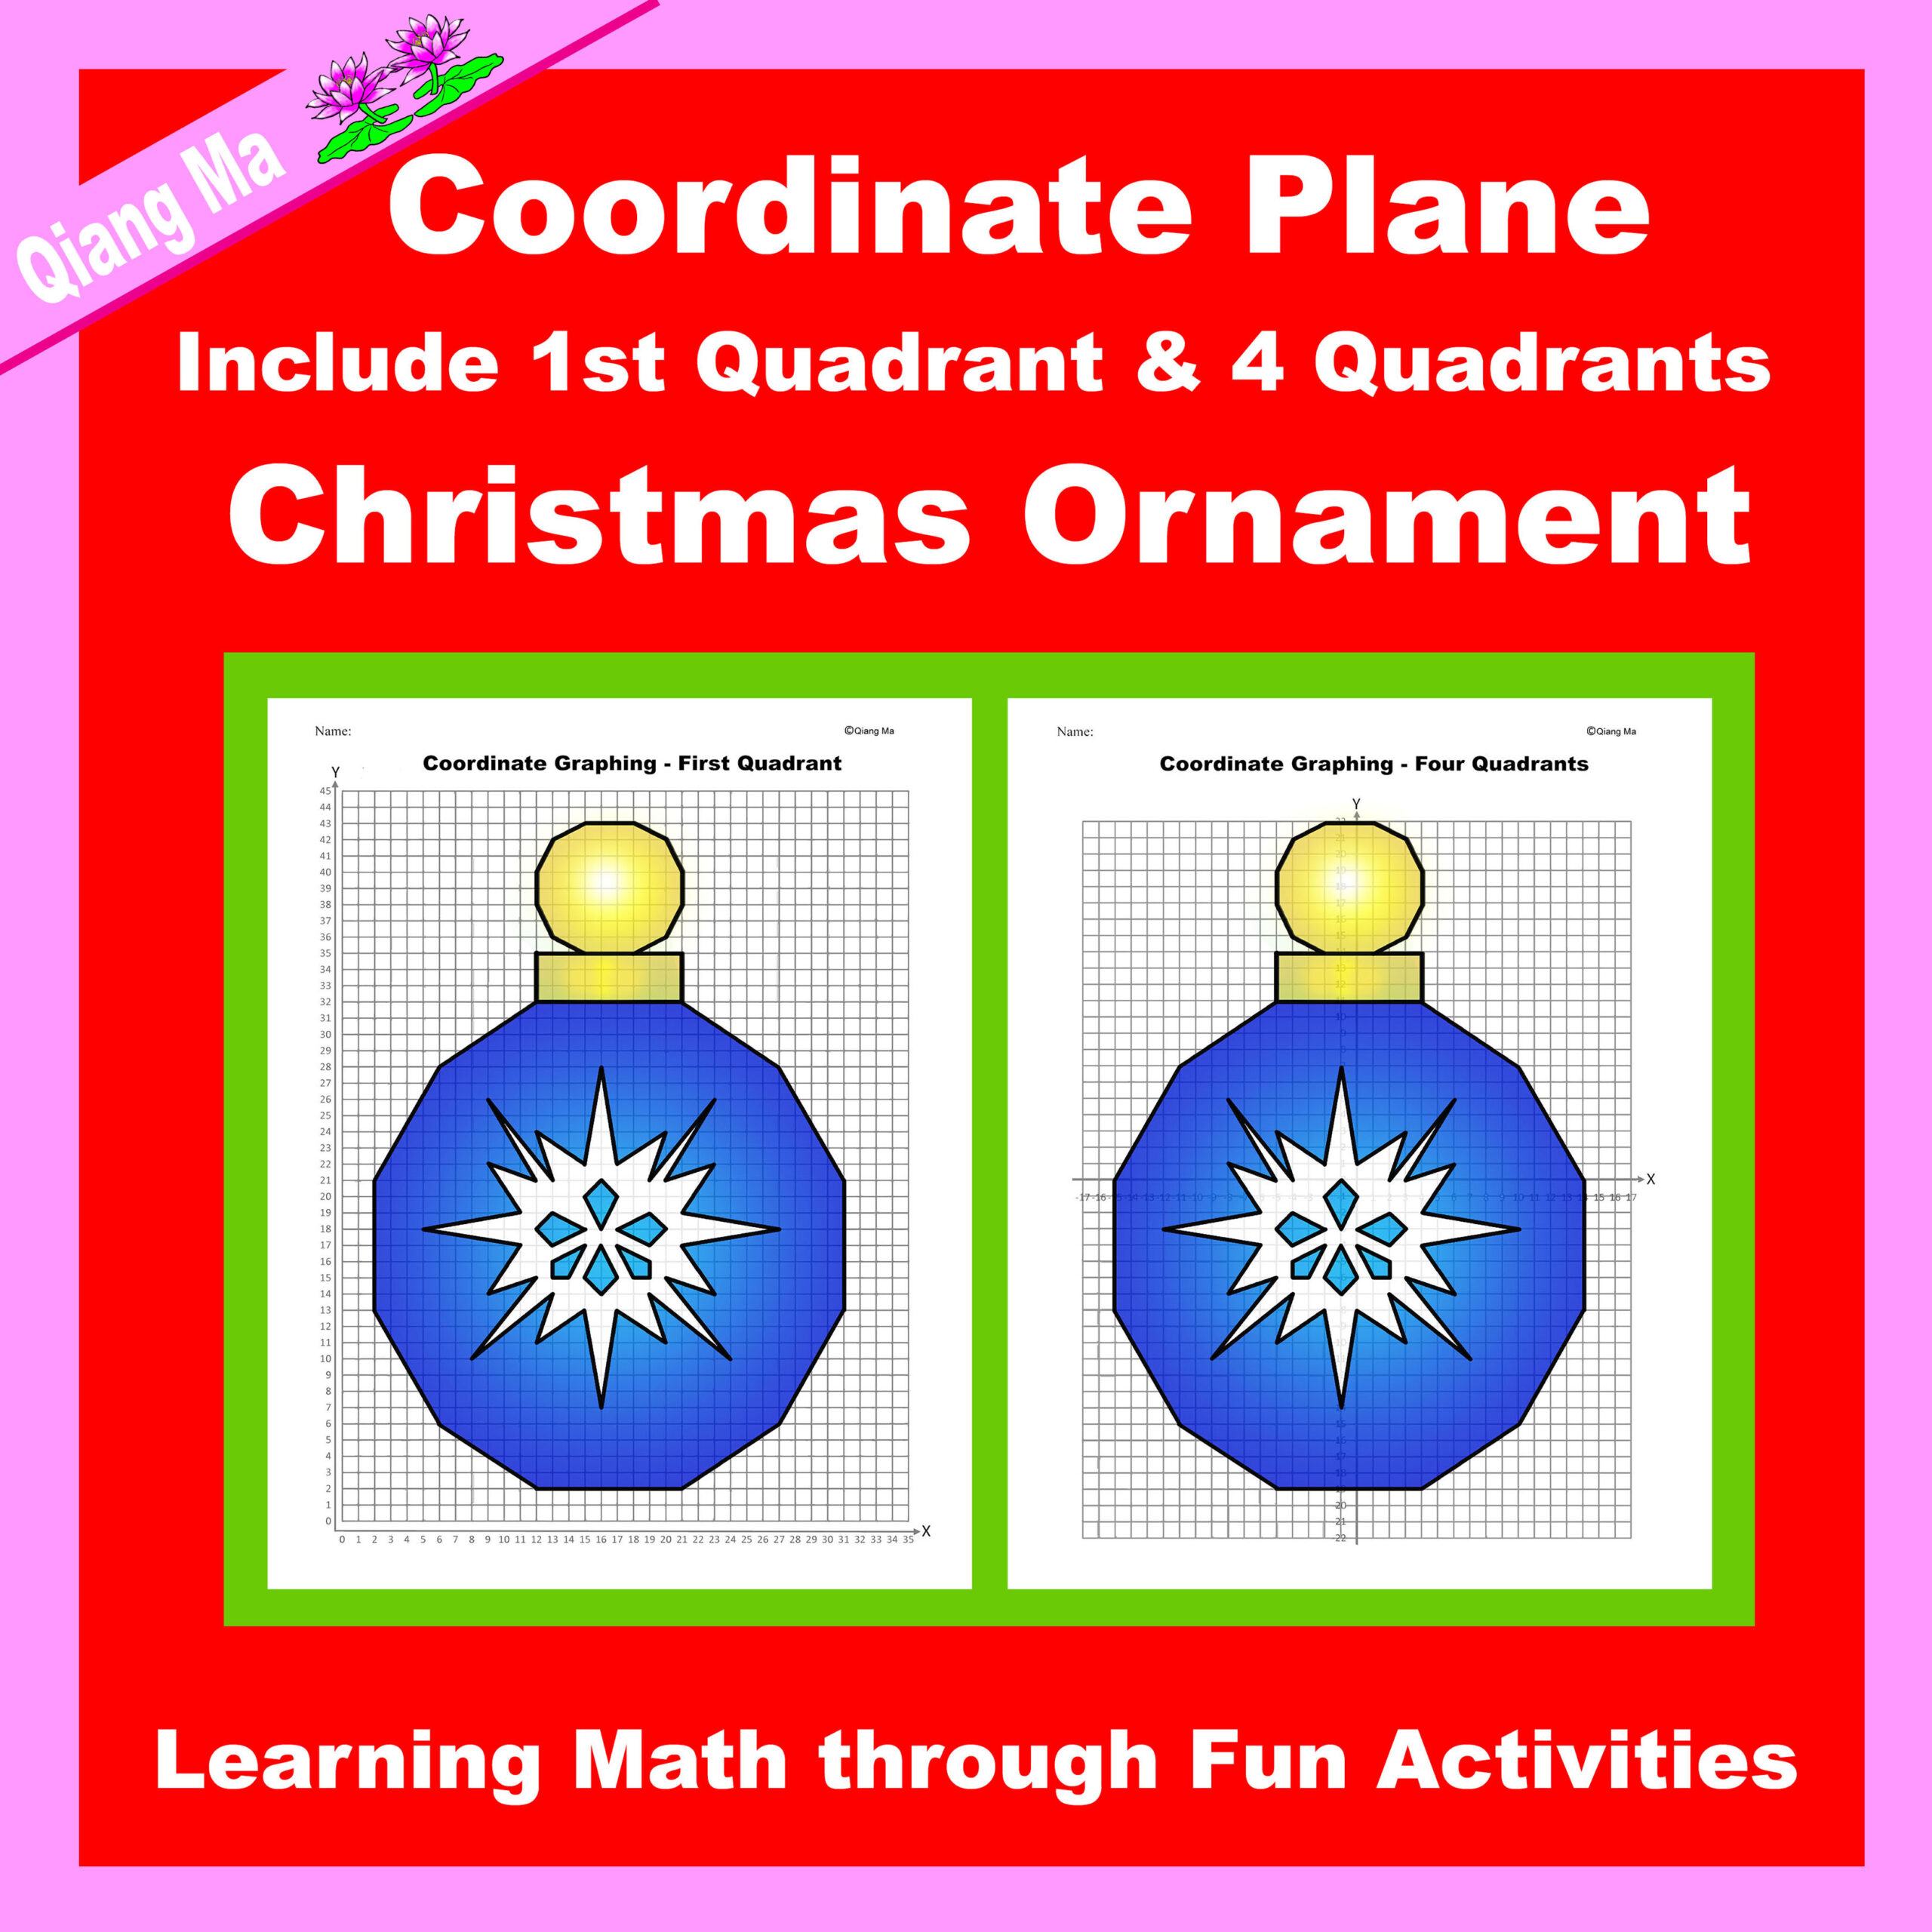 Christmas Coordinate Plane Graphing Picture: Christmas Ornament's featured image